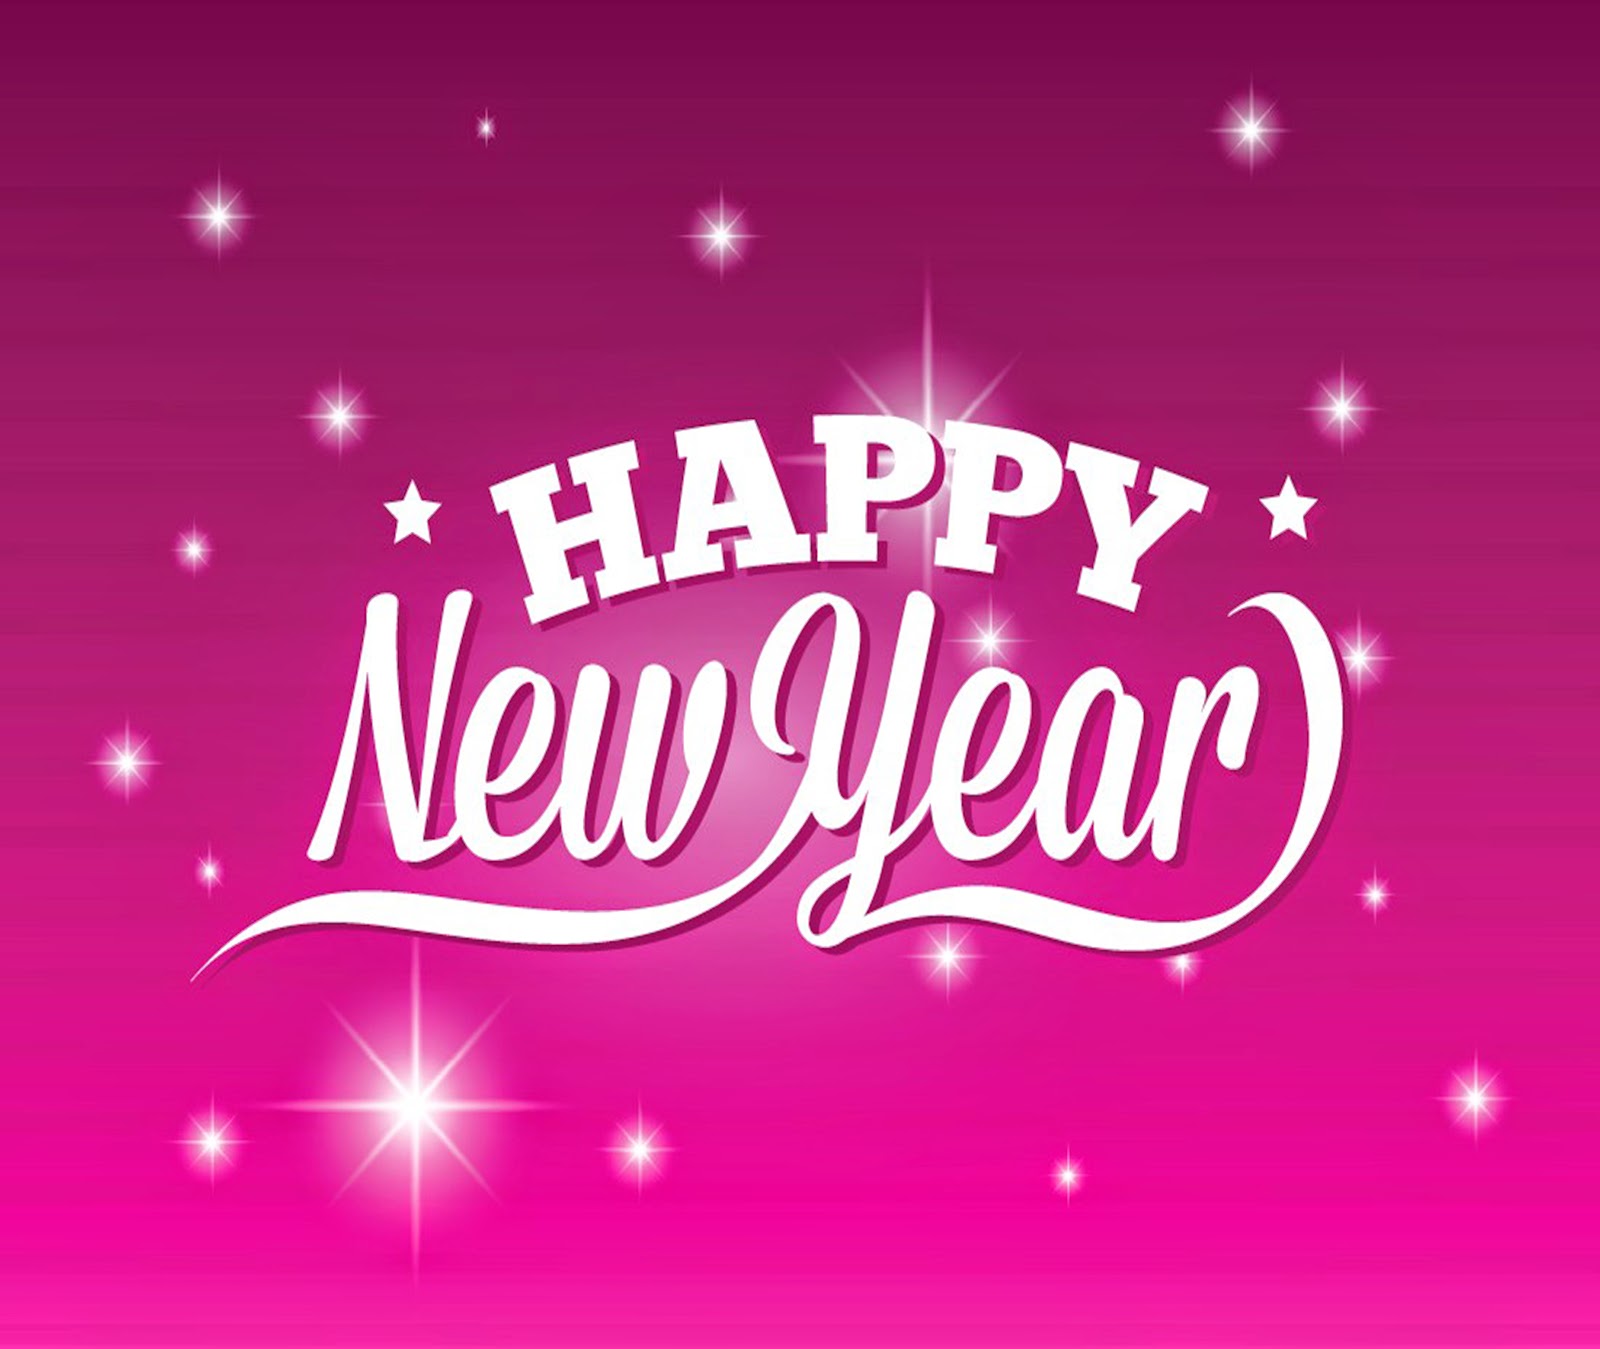 Happy-New-Year-2015-Wallpapers-hd